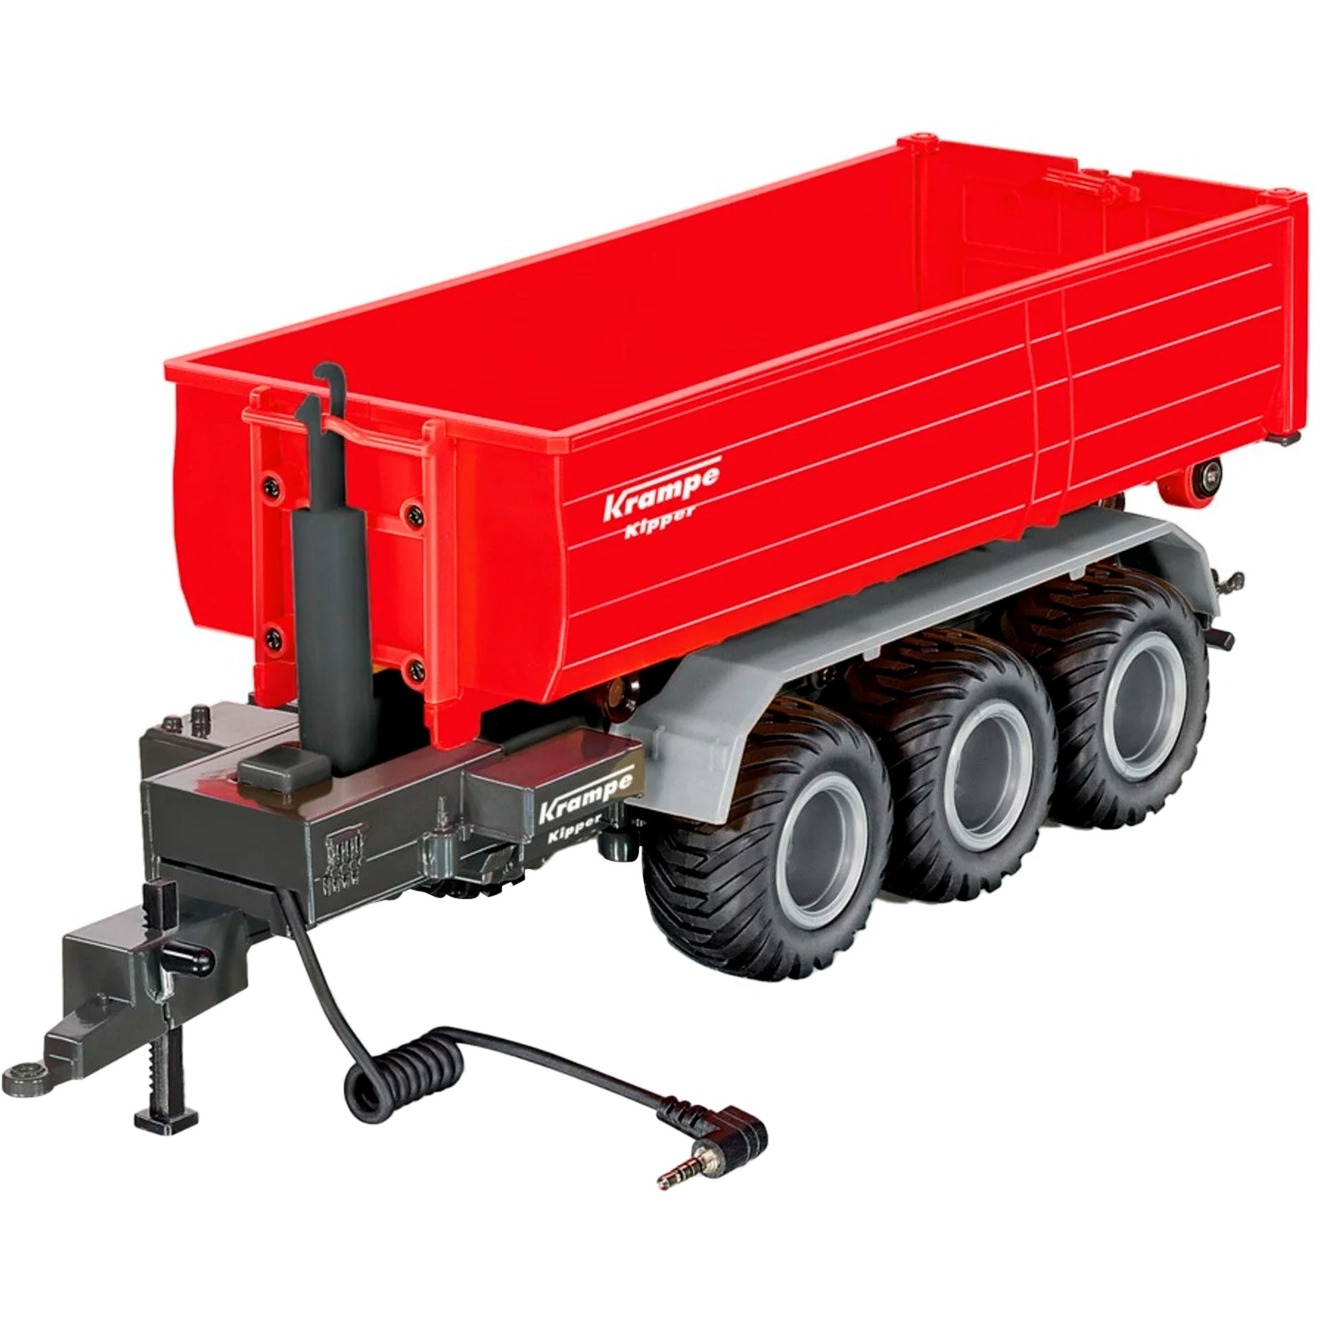 CONTROL32 3-Achs-Hakenliftfahrgestell mit Mulden-Container, RC